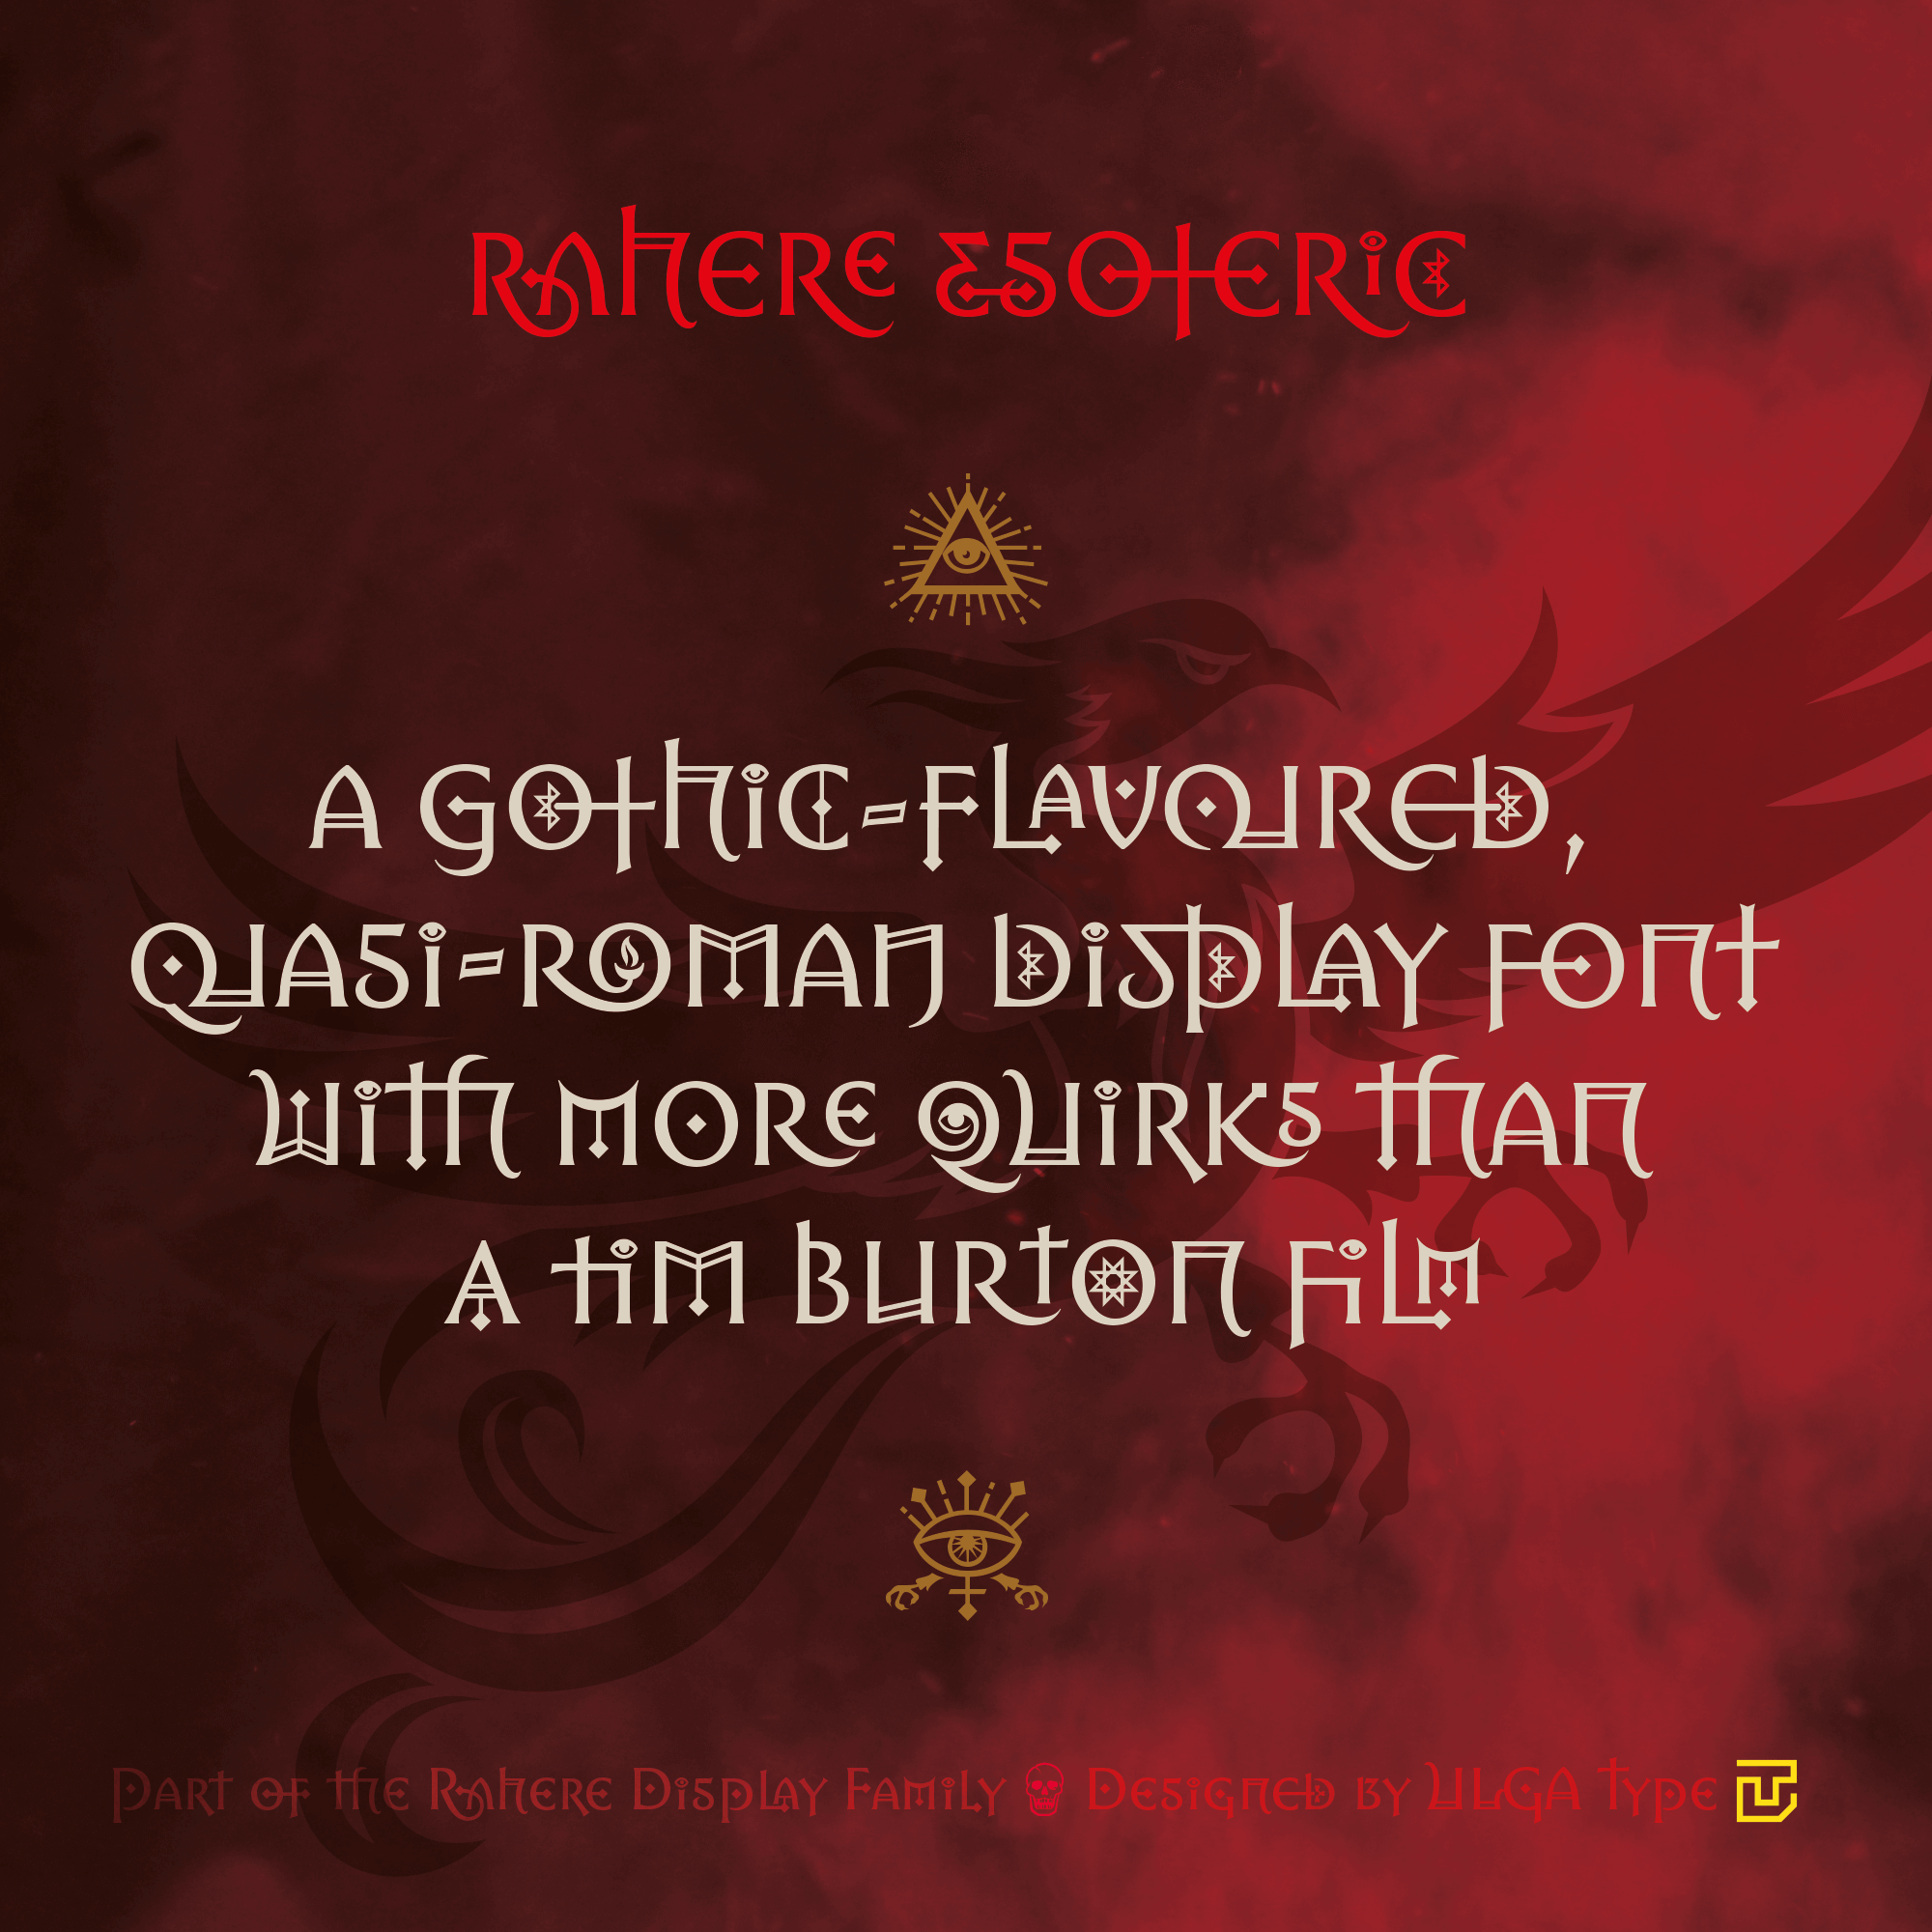 Rahere Esoteric is a gothic-flavoured, quasi-roman display font